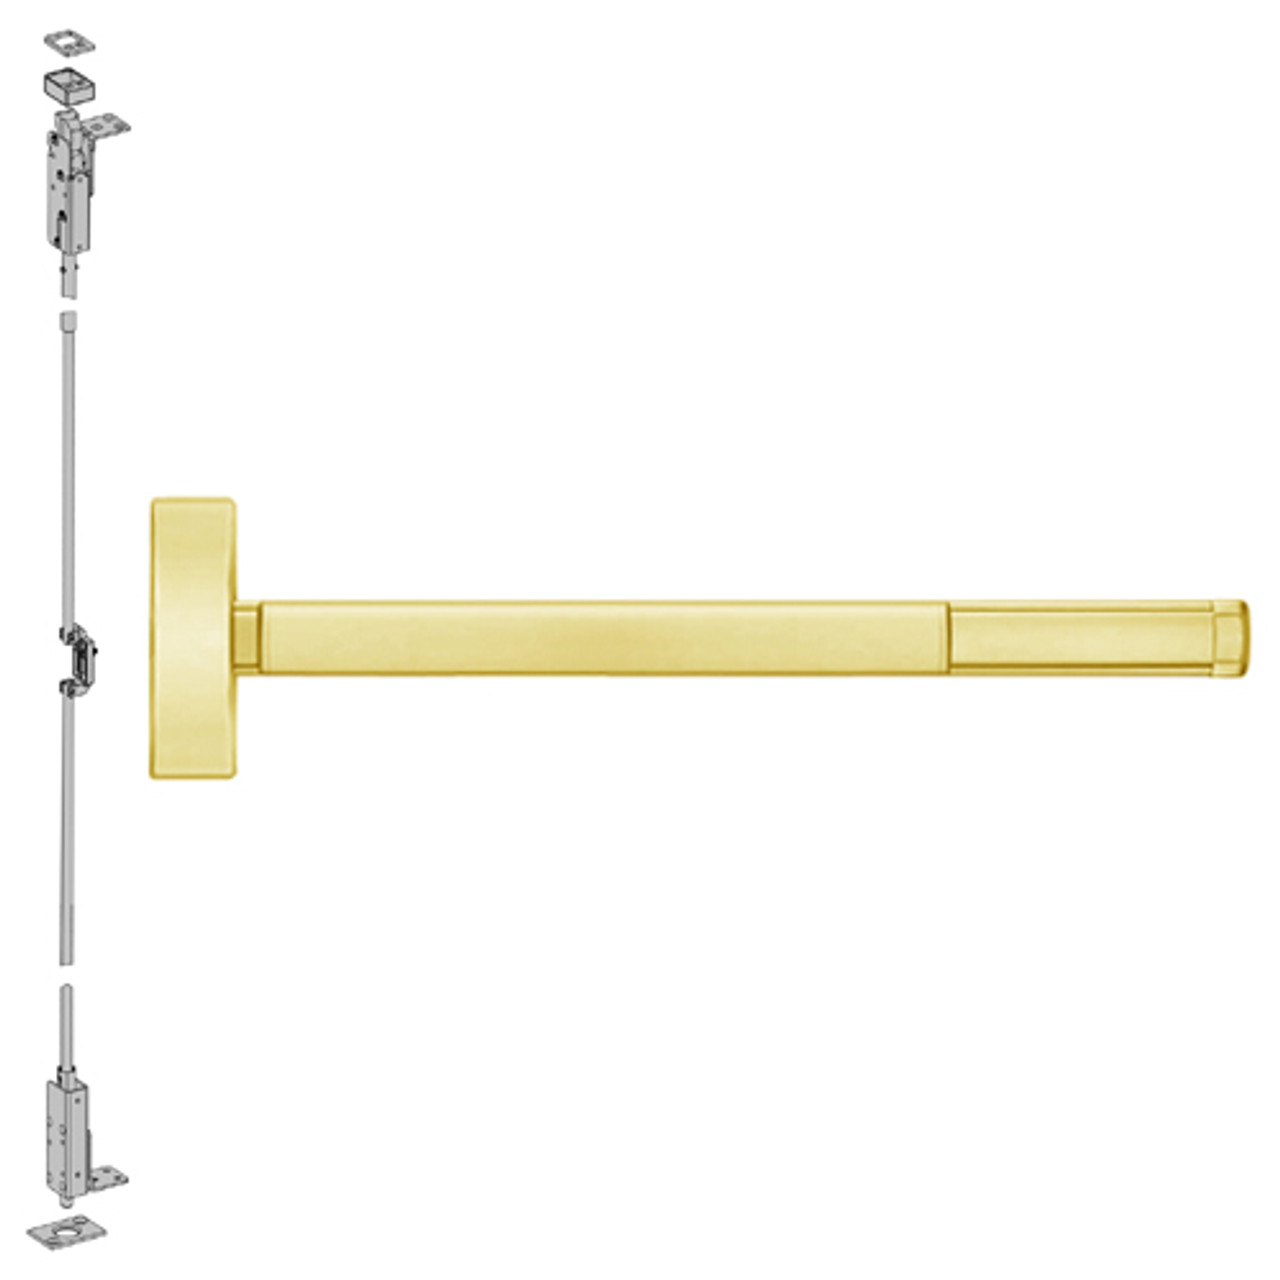 TSFL2701-605-48 PHI 2700 Series Wood Door Concealed Vertical Exit Device with Touchbar Monitoring Switch Prepped for Cover Plate in Bright Brass Finish